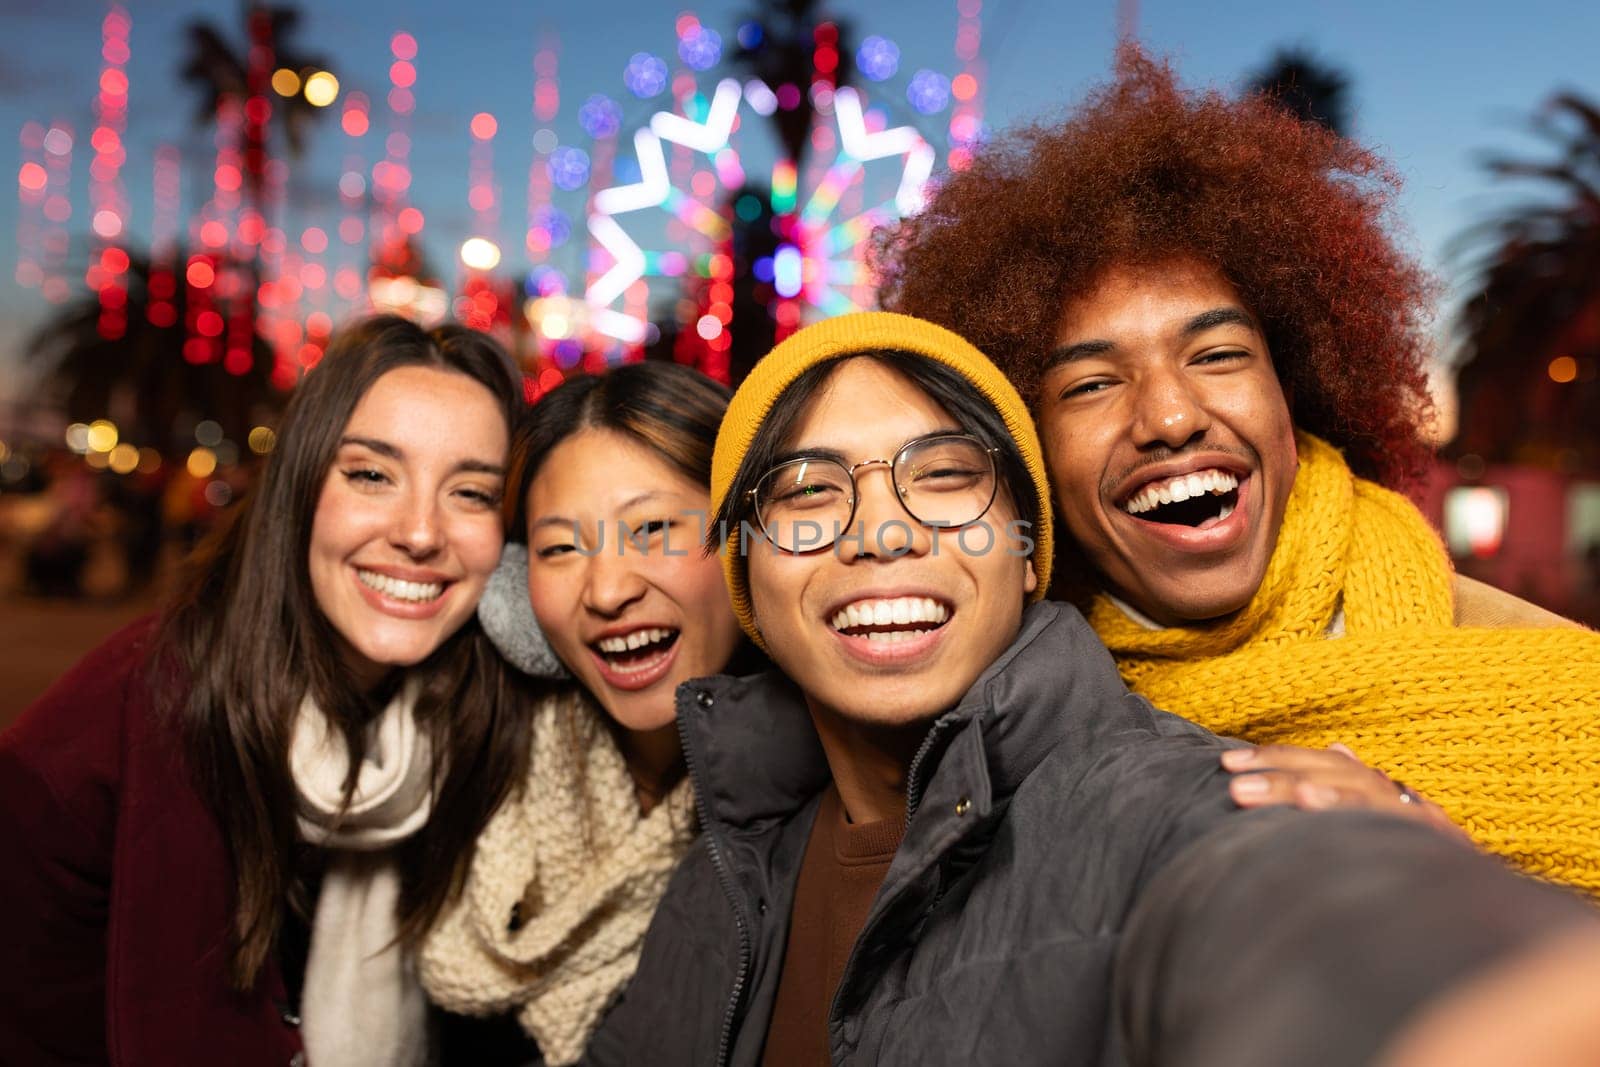 Multiracial young friends laughing and having fun together taking selfie during winter Christmas market looking at camera. Friendship concept.